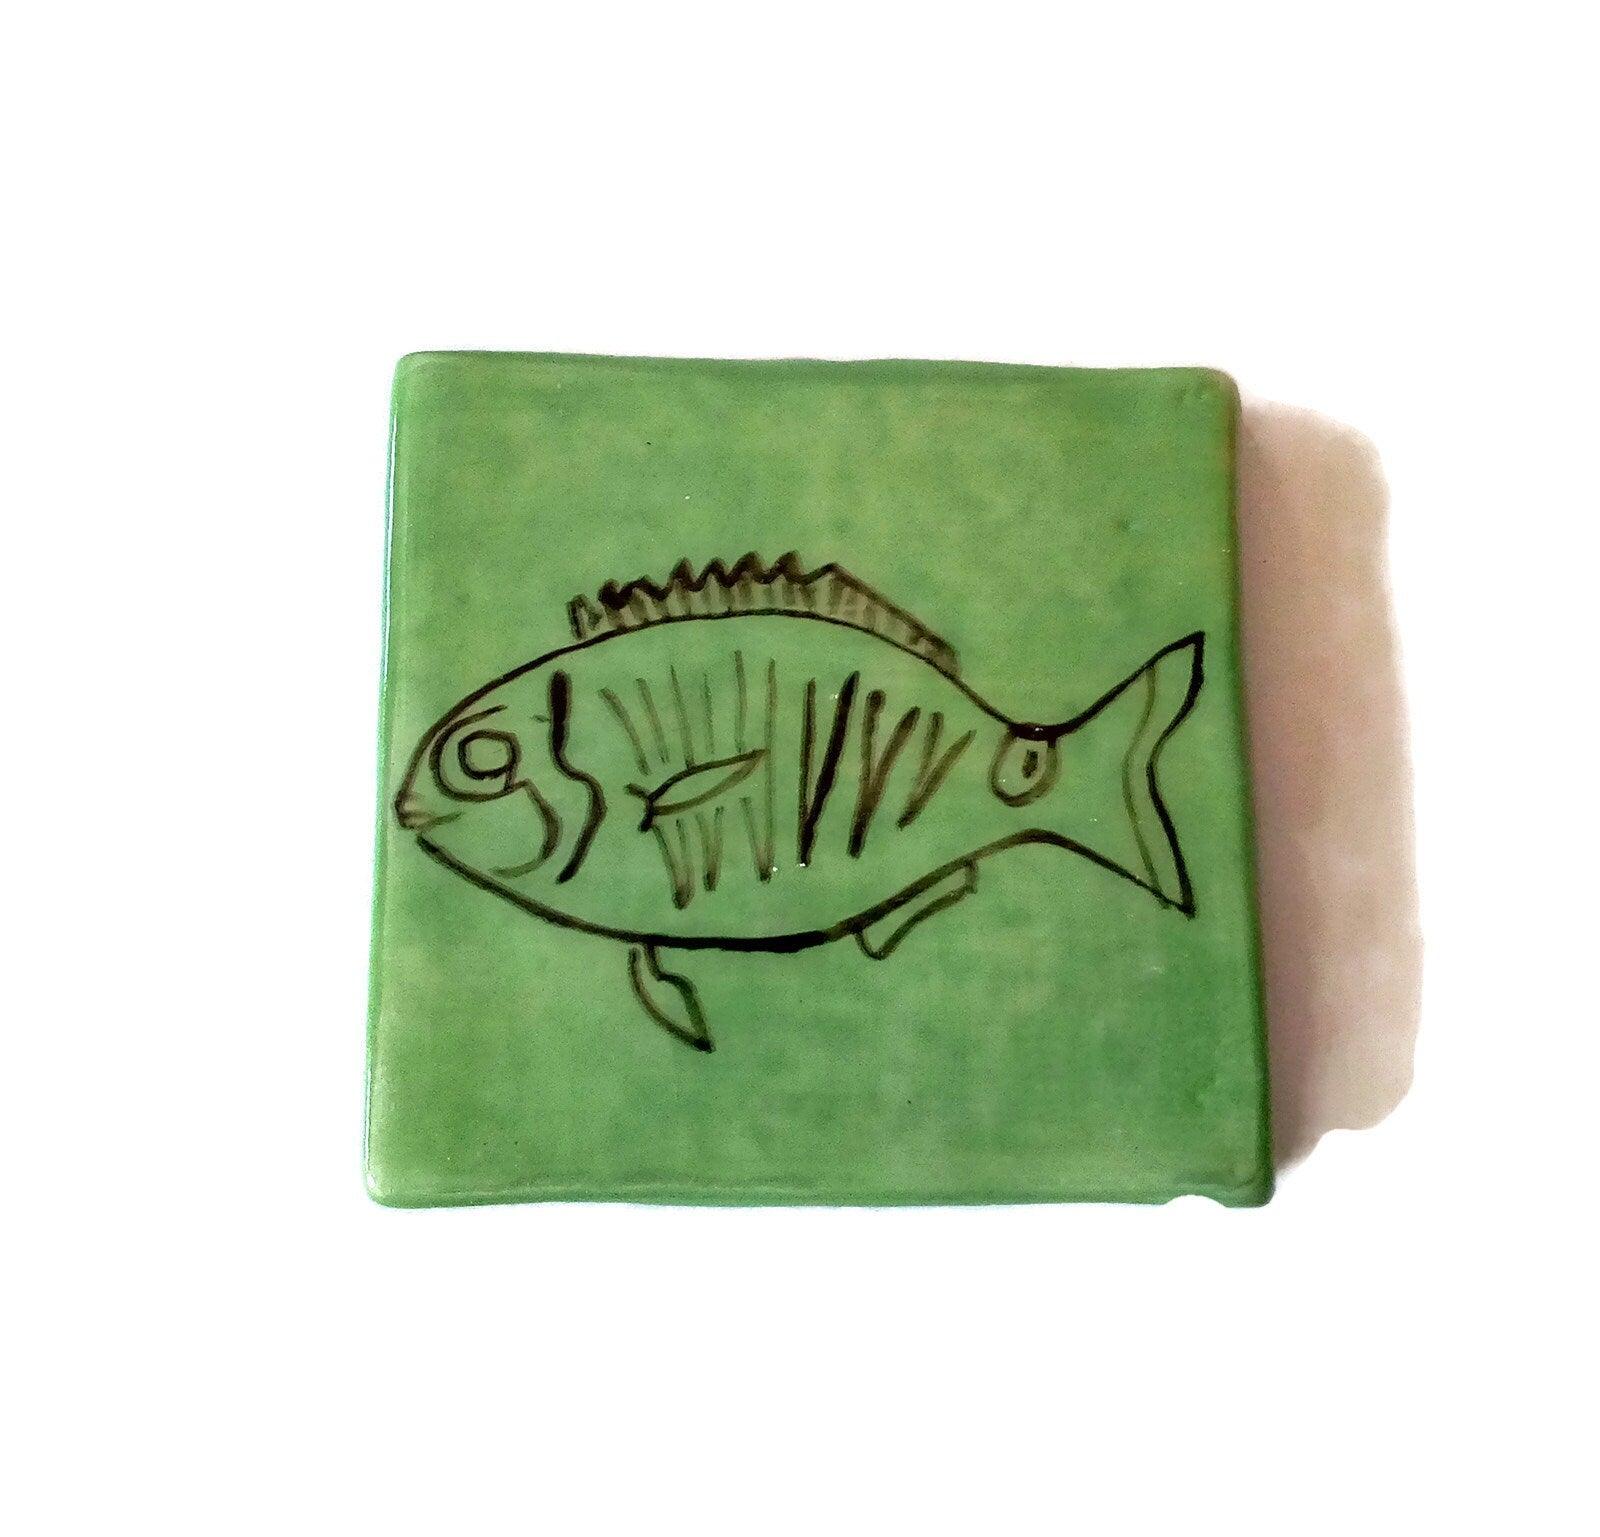 1Pc Hand Painted Tiles, Square Mosaic Tiles, Ceramic Fish Tiles, Mediterranean Best Gifts For Him, Best Seller Wall Tiles - Ceramica Ana Rafael